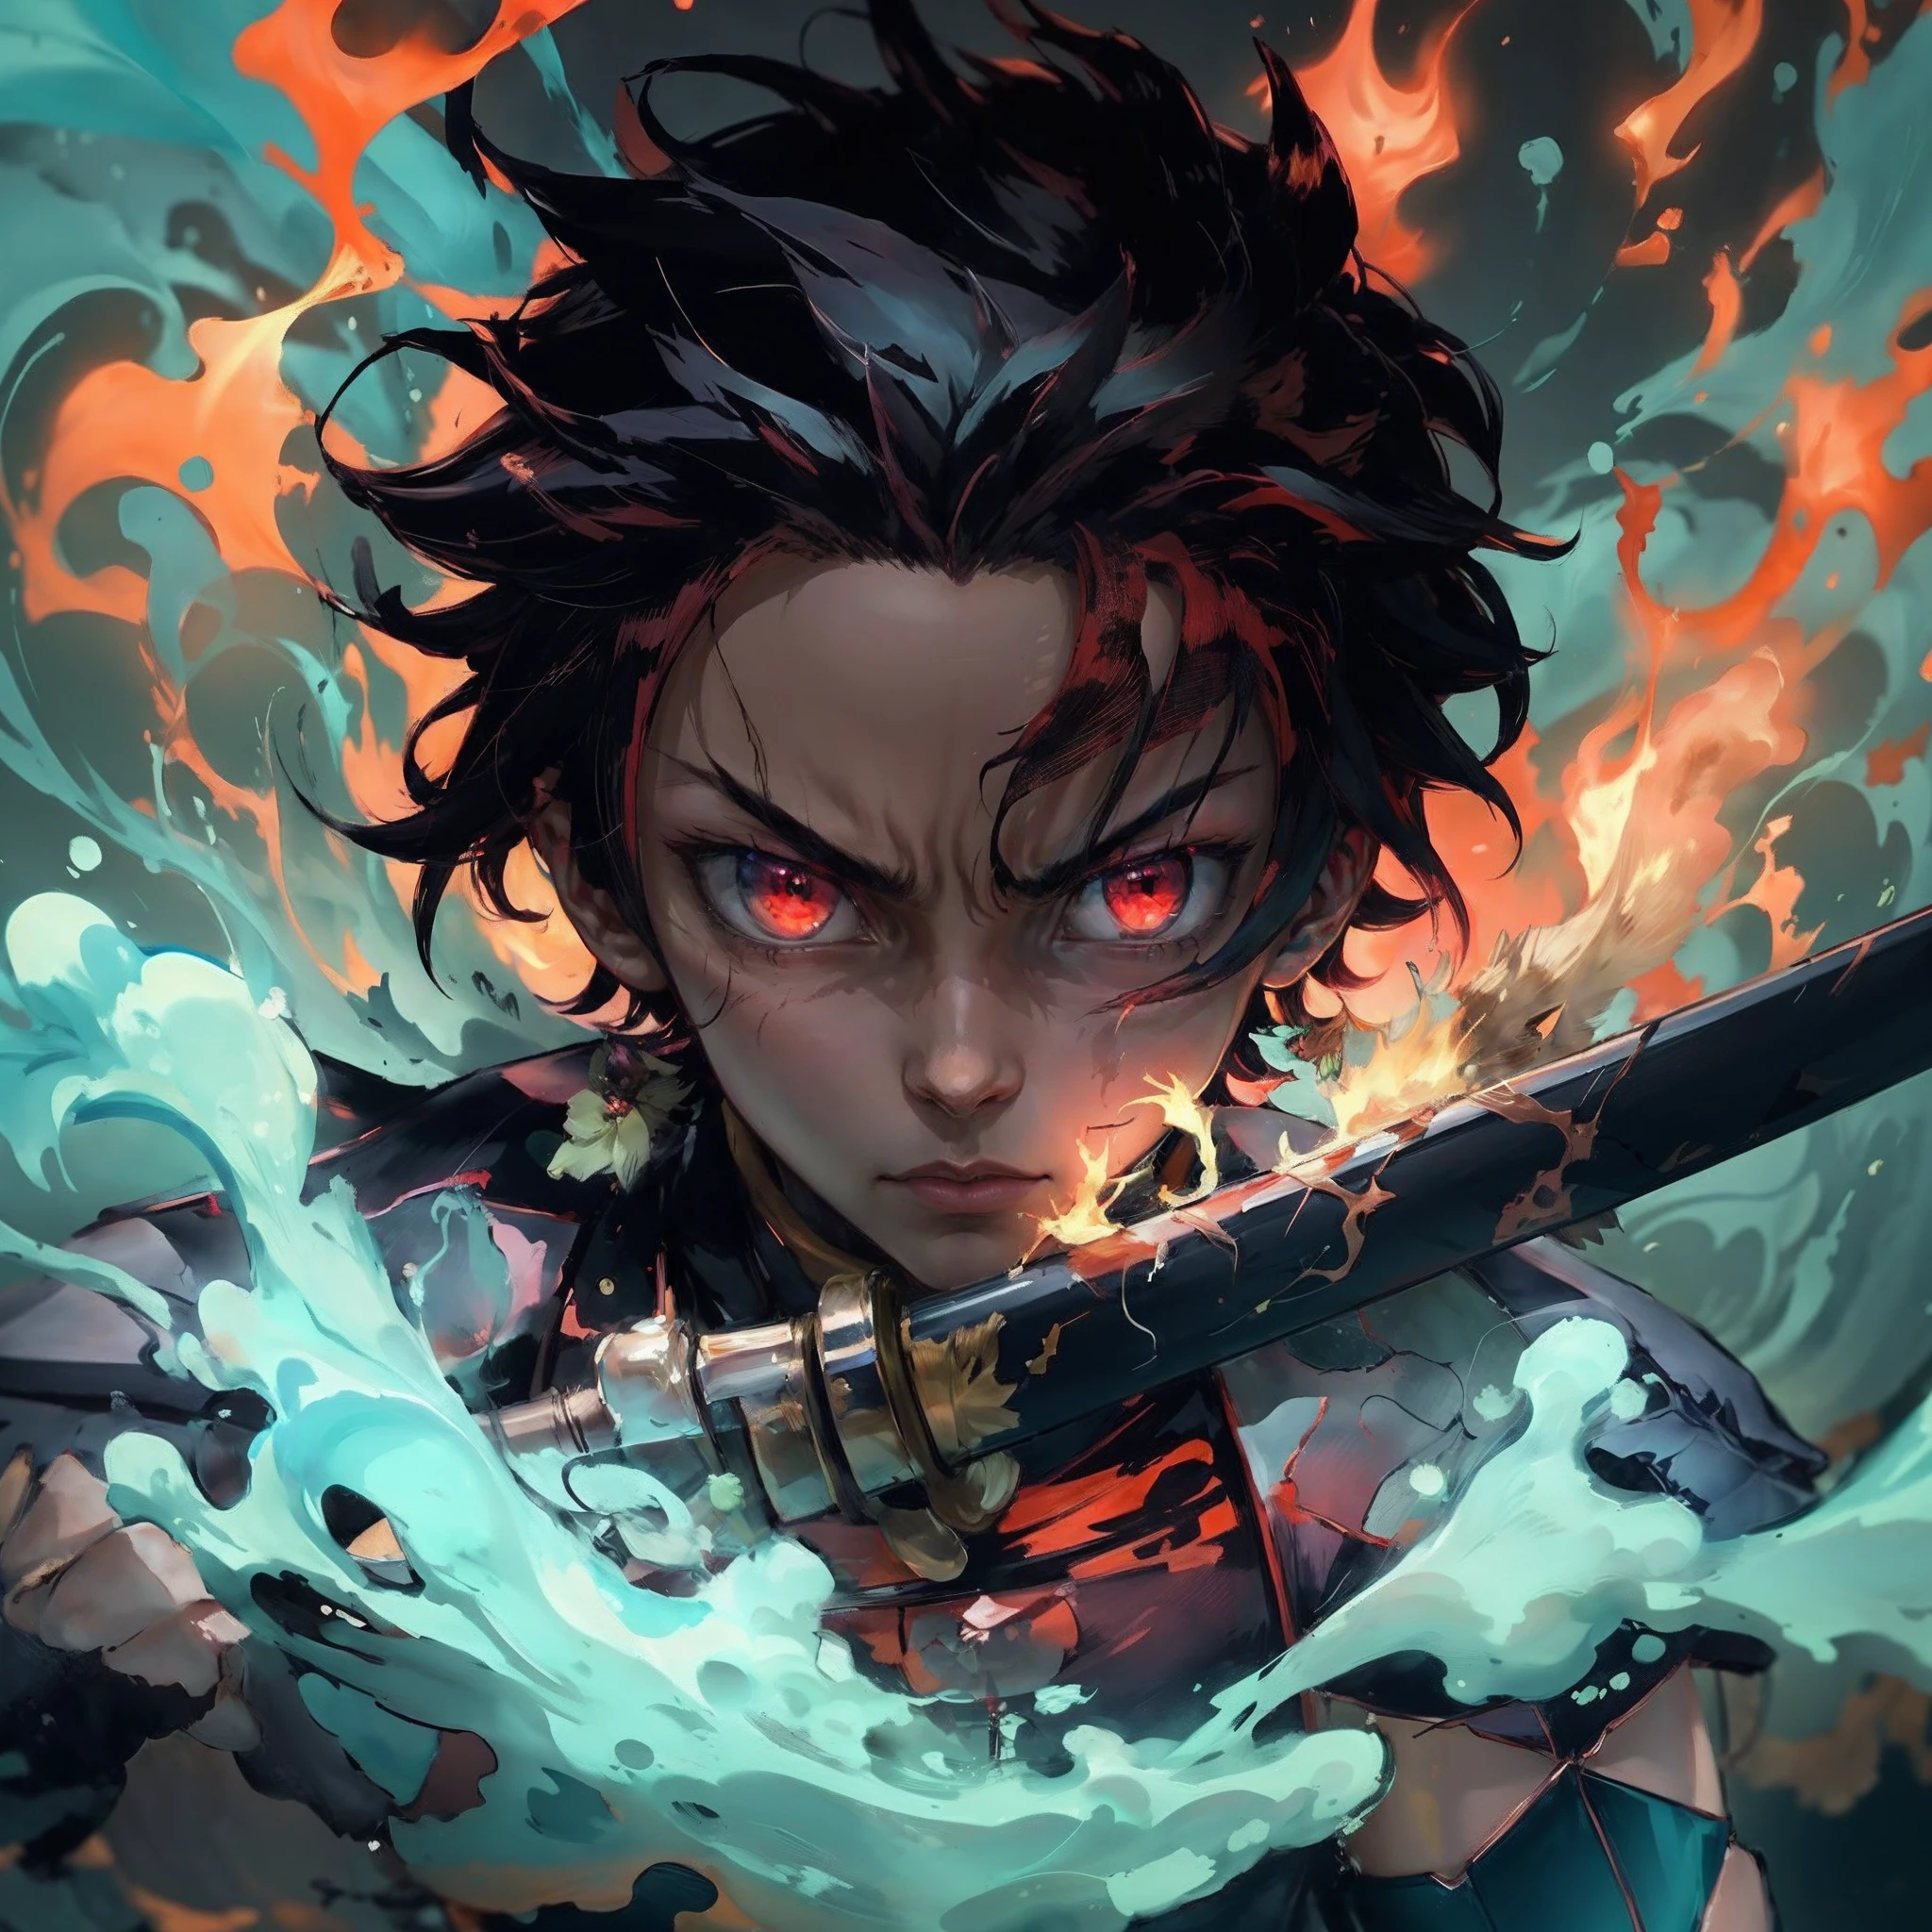 anime character with a sword in front of a fire and water background, cute guy in the art Demon Slayer, Demon Slayer art style, Demon Slayer rui fanart, badass anime 8 k, Demon Slayer, arte chave do anime, 4 k manga wallpaper, Kimetsu no yaiba, Anime Wallaper, anime epic artwork, Anime Art Wallpaper 8K, Arte do local